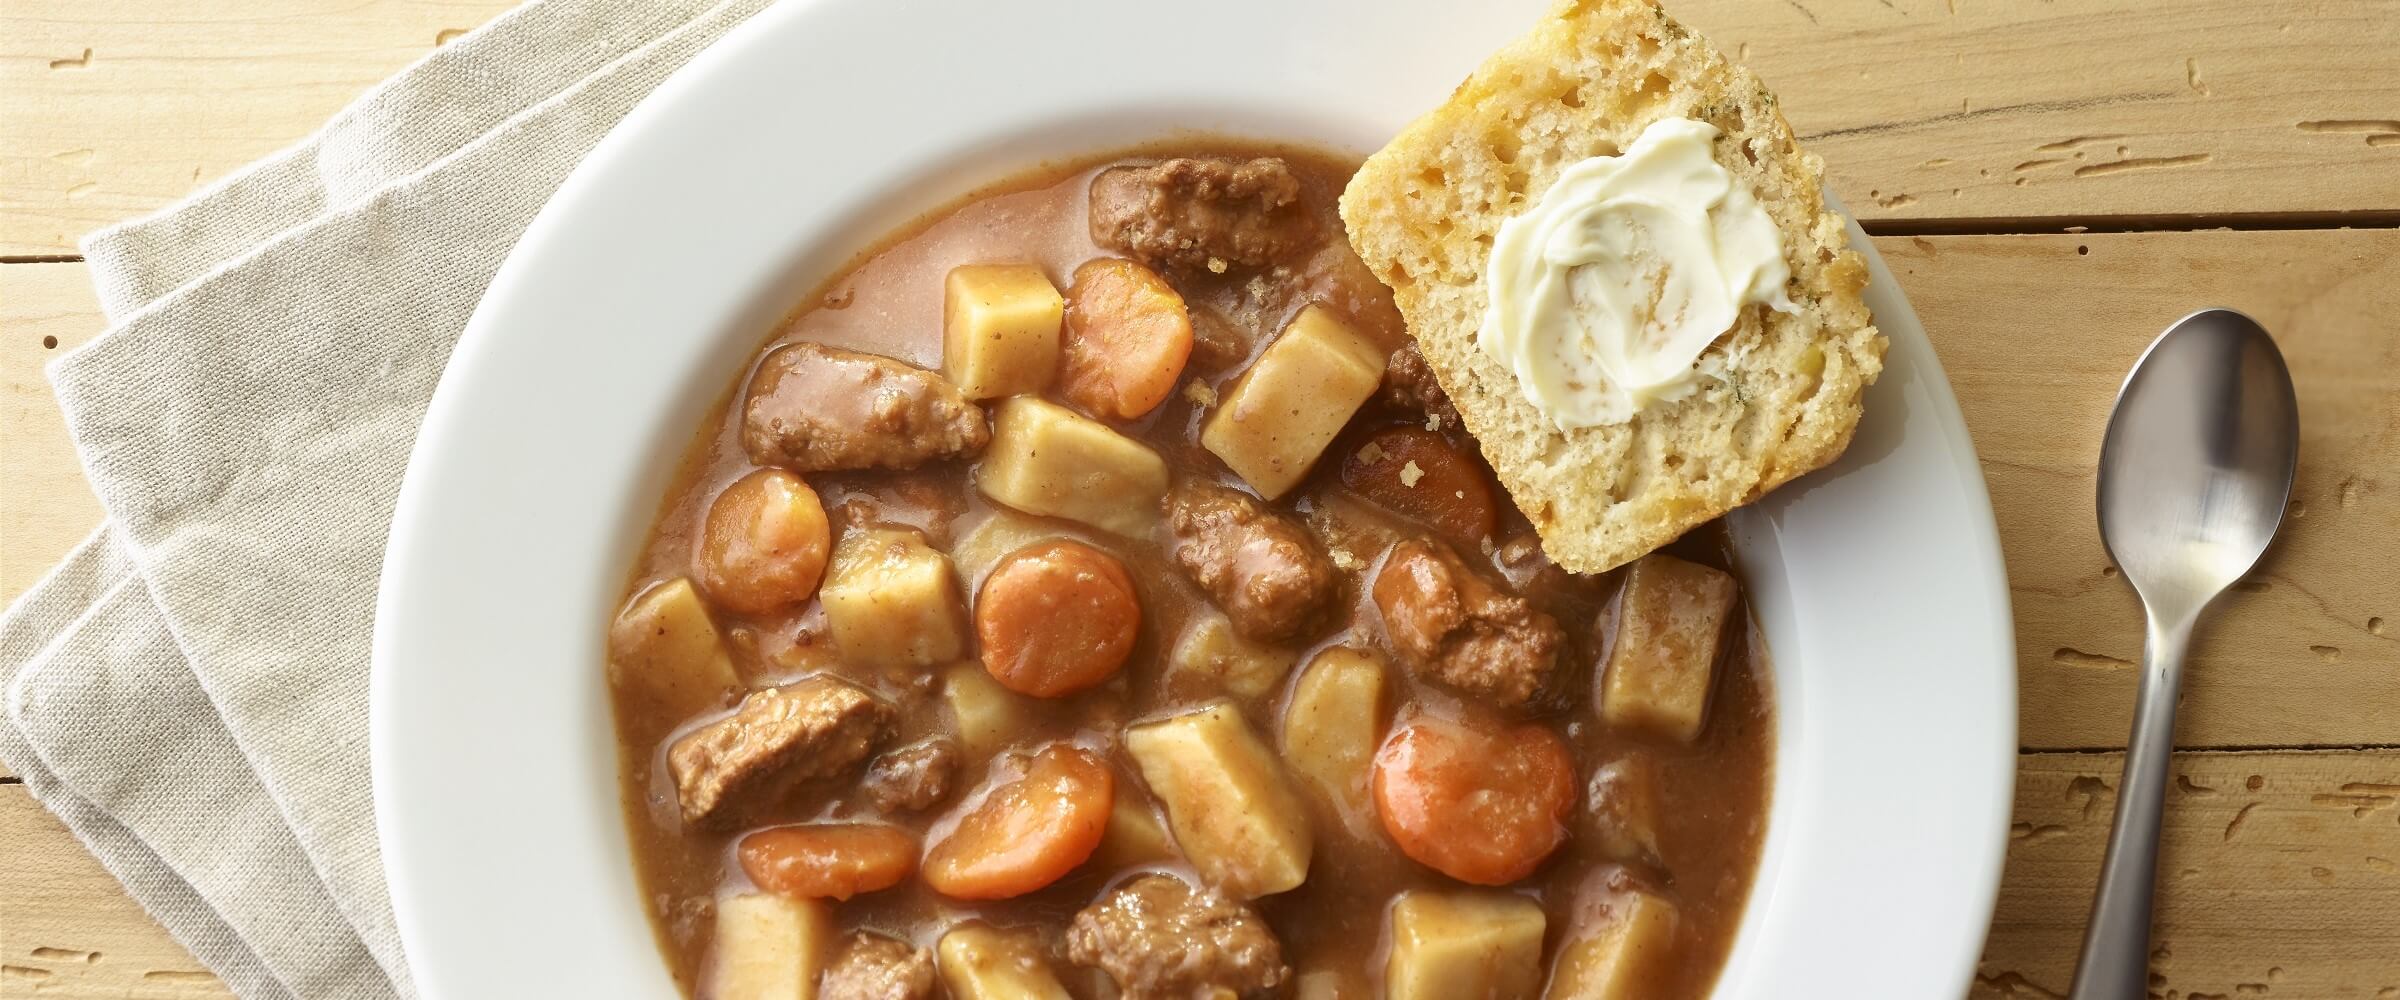 Beef stew with buttered beer bread